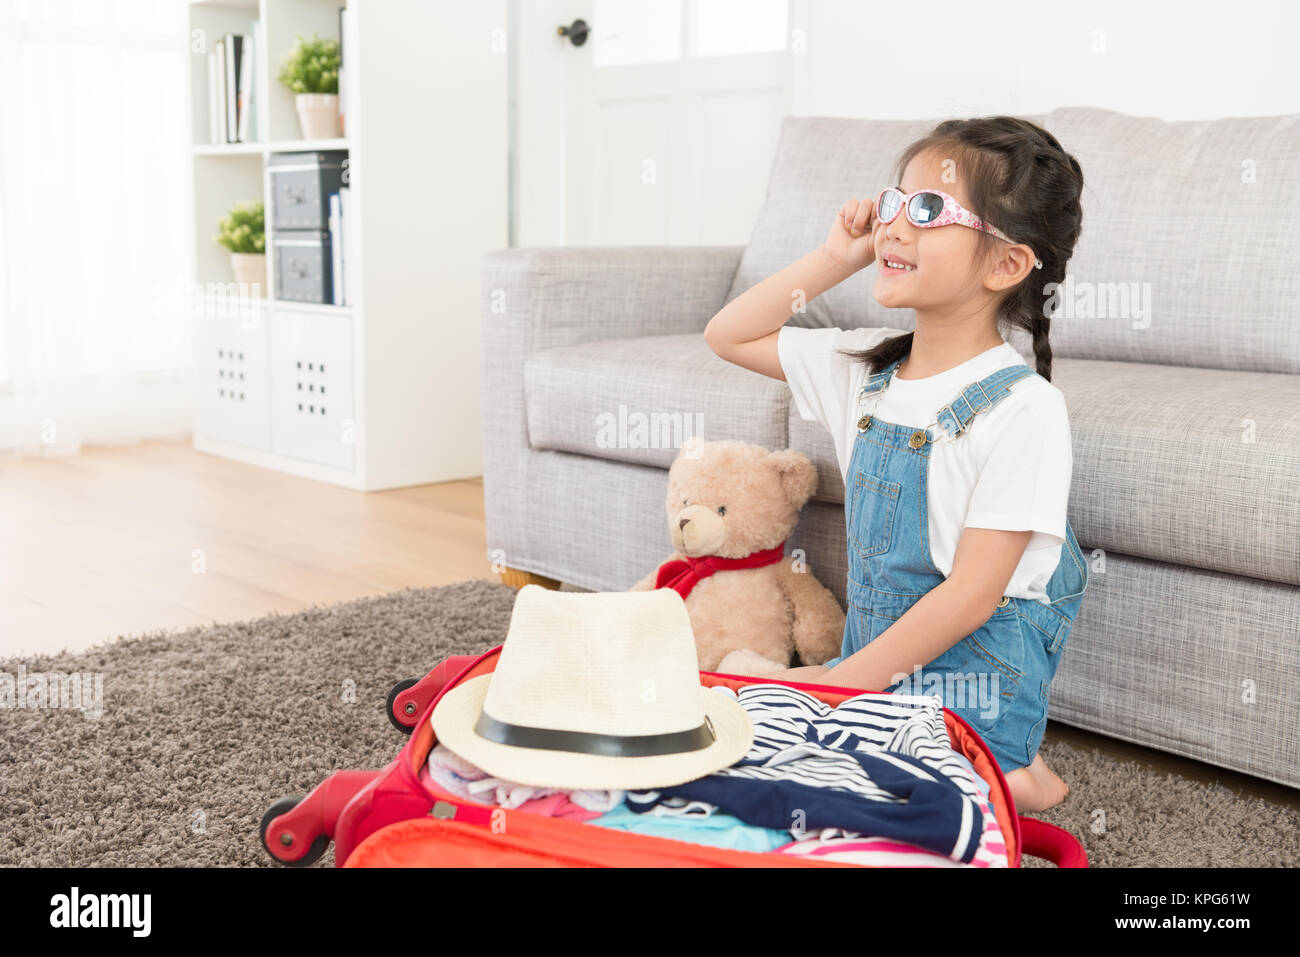 smiling happy girl children wearing sunglasses sitting on living room floor with teddy bear and finished packing luggage suitcase making daydreaming g Stock Photo